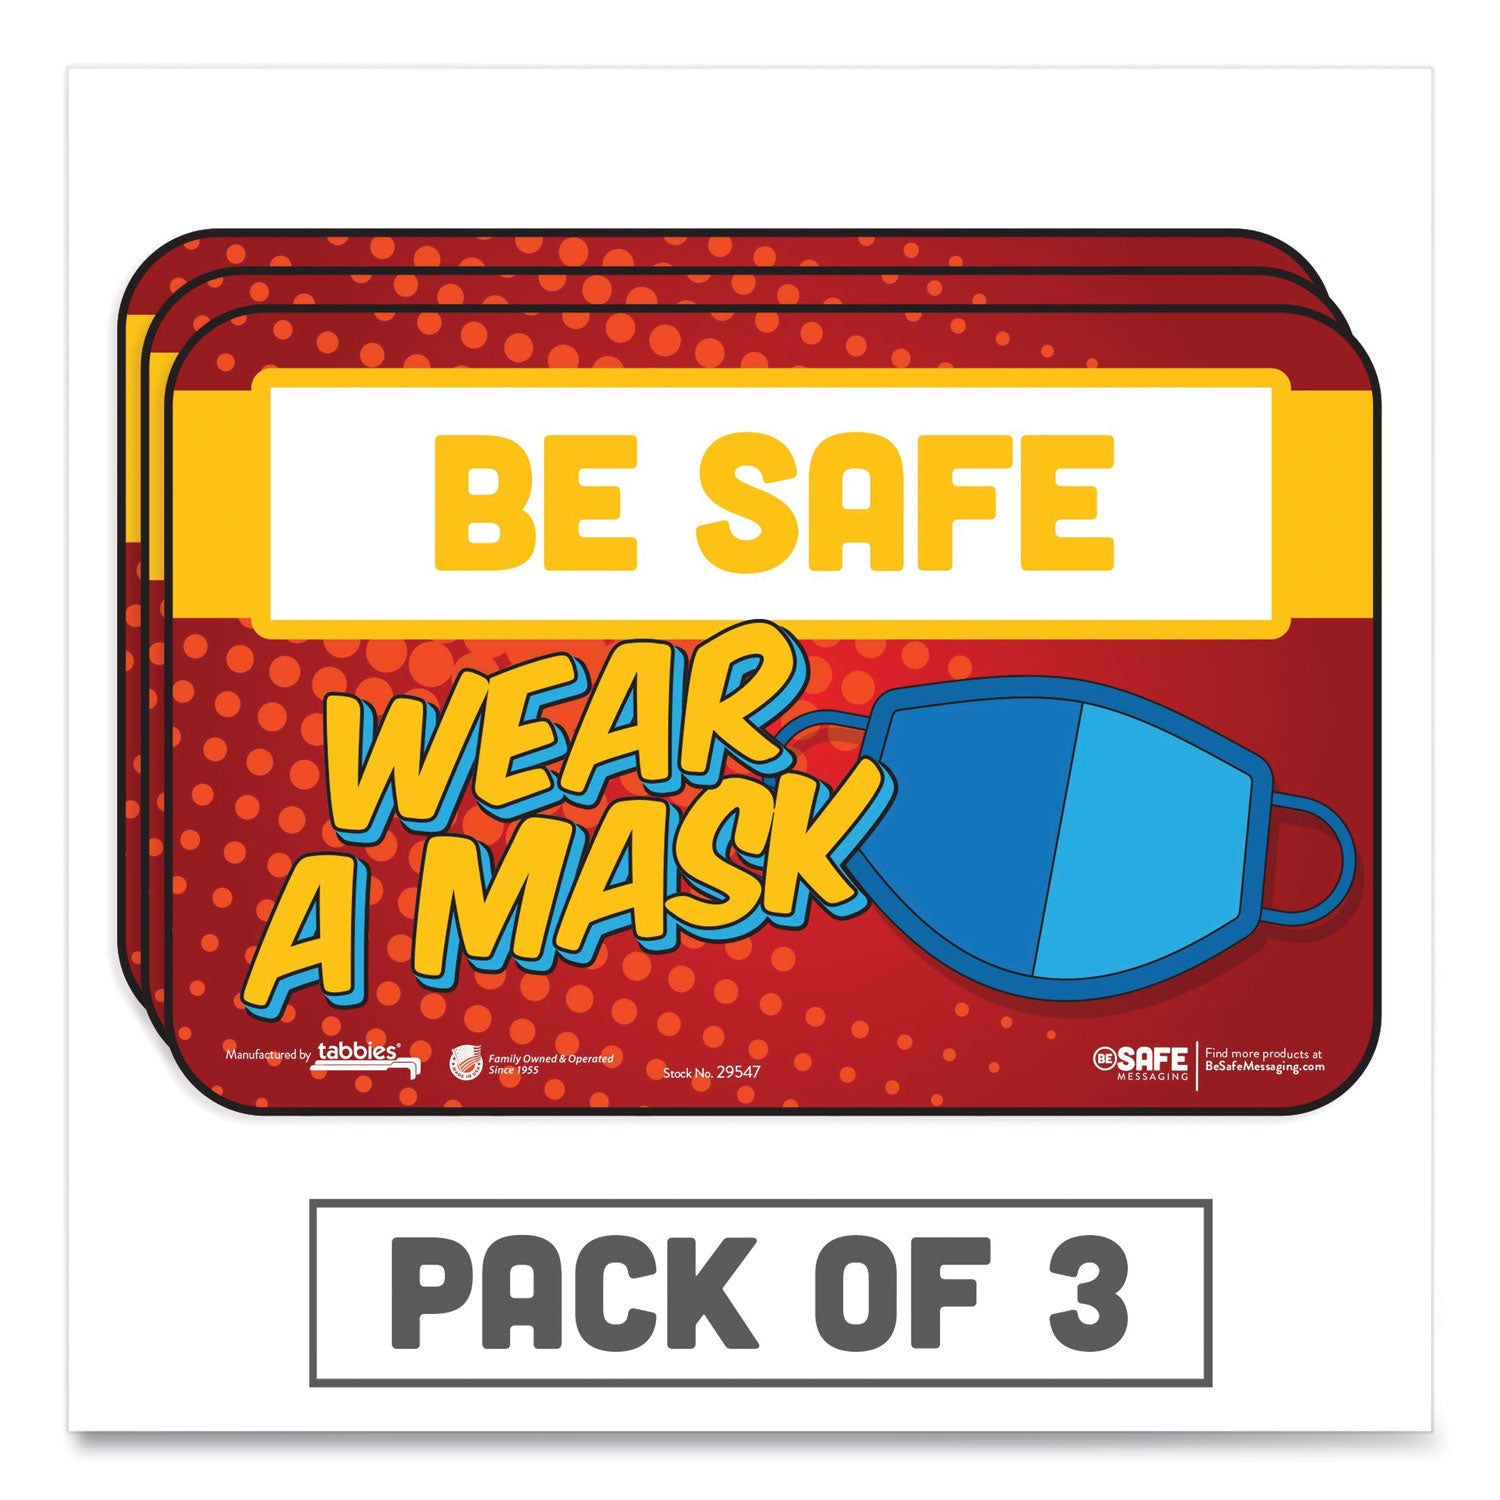 besafe-messaging-education-wall-signs-9-x-6-be-safe-wear-a-mask-3-pack_tab29547 - 1